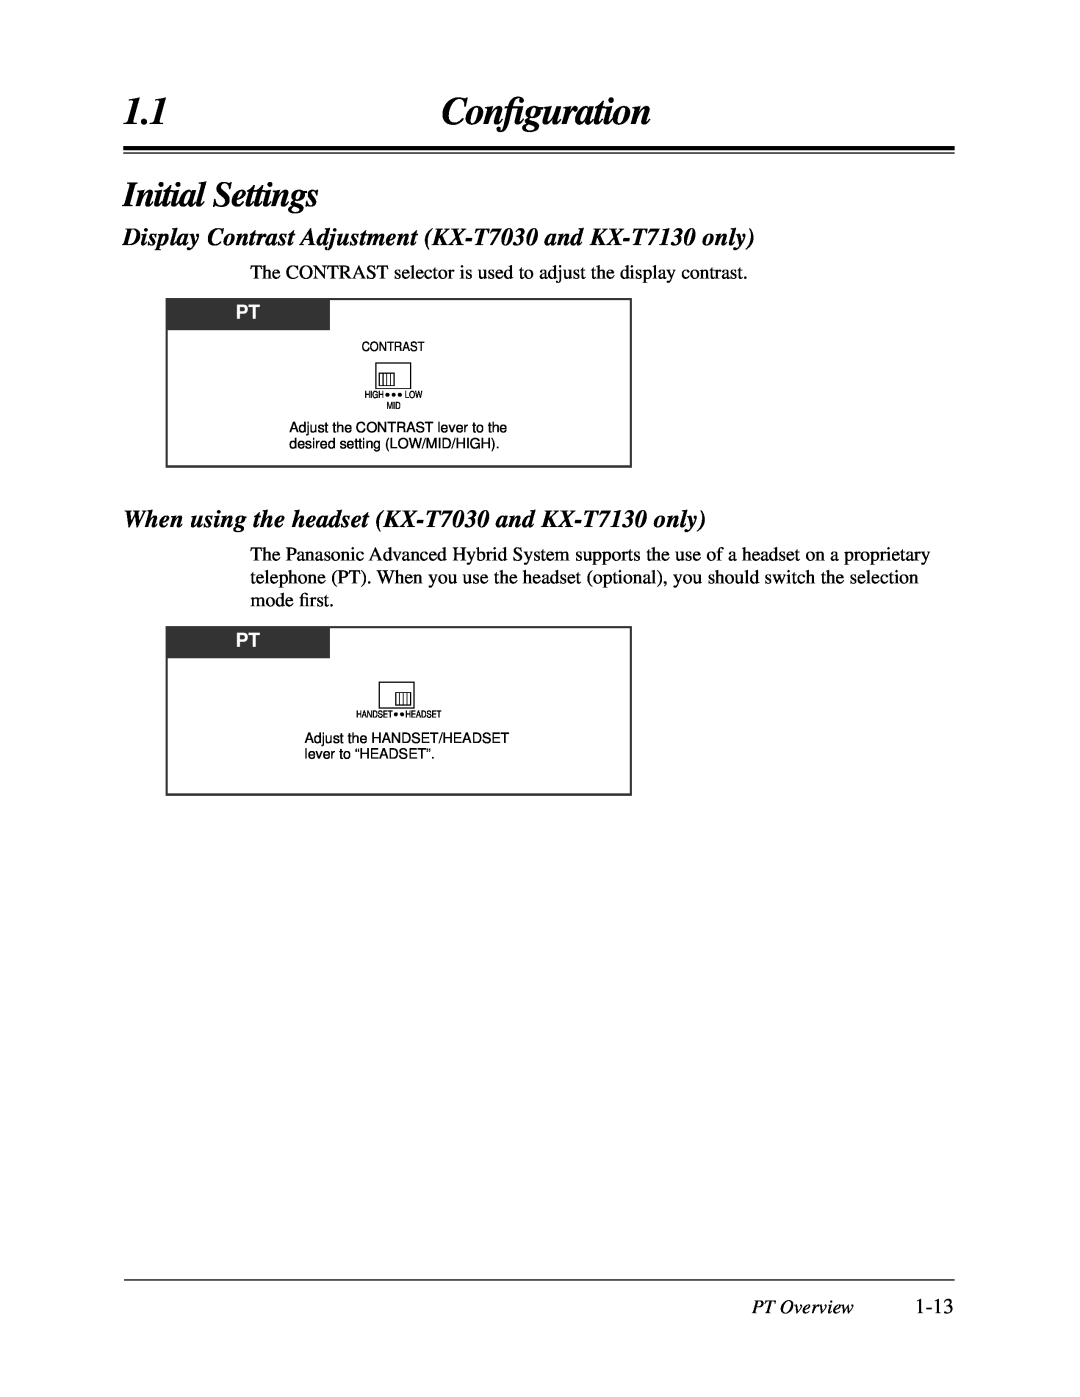 Panasonic KX-TA624 Initial Settings, When using the headset KX-T7030and KX-T7130only, 1.1Conﬁguration, 1-13, PT Overview 